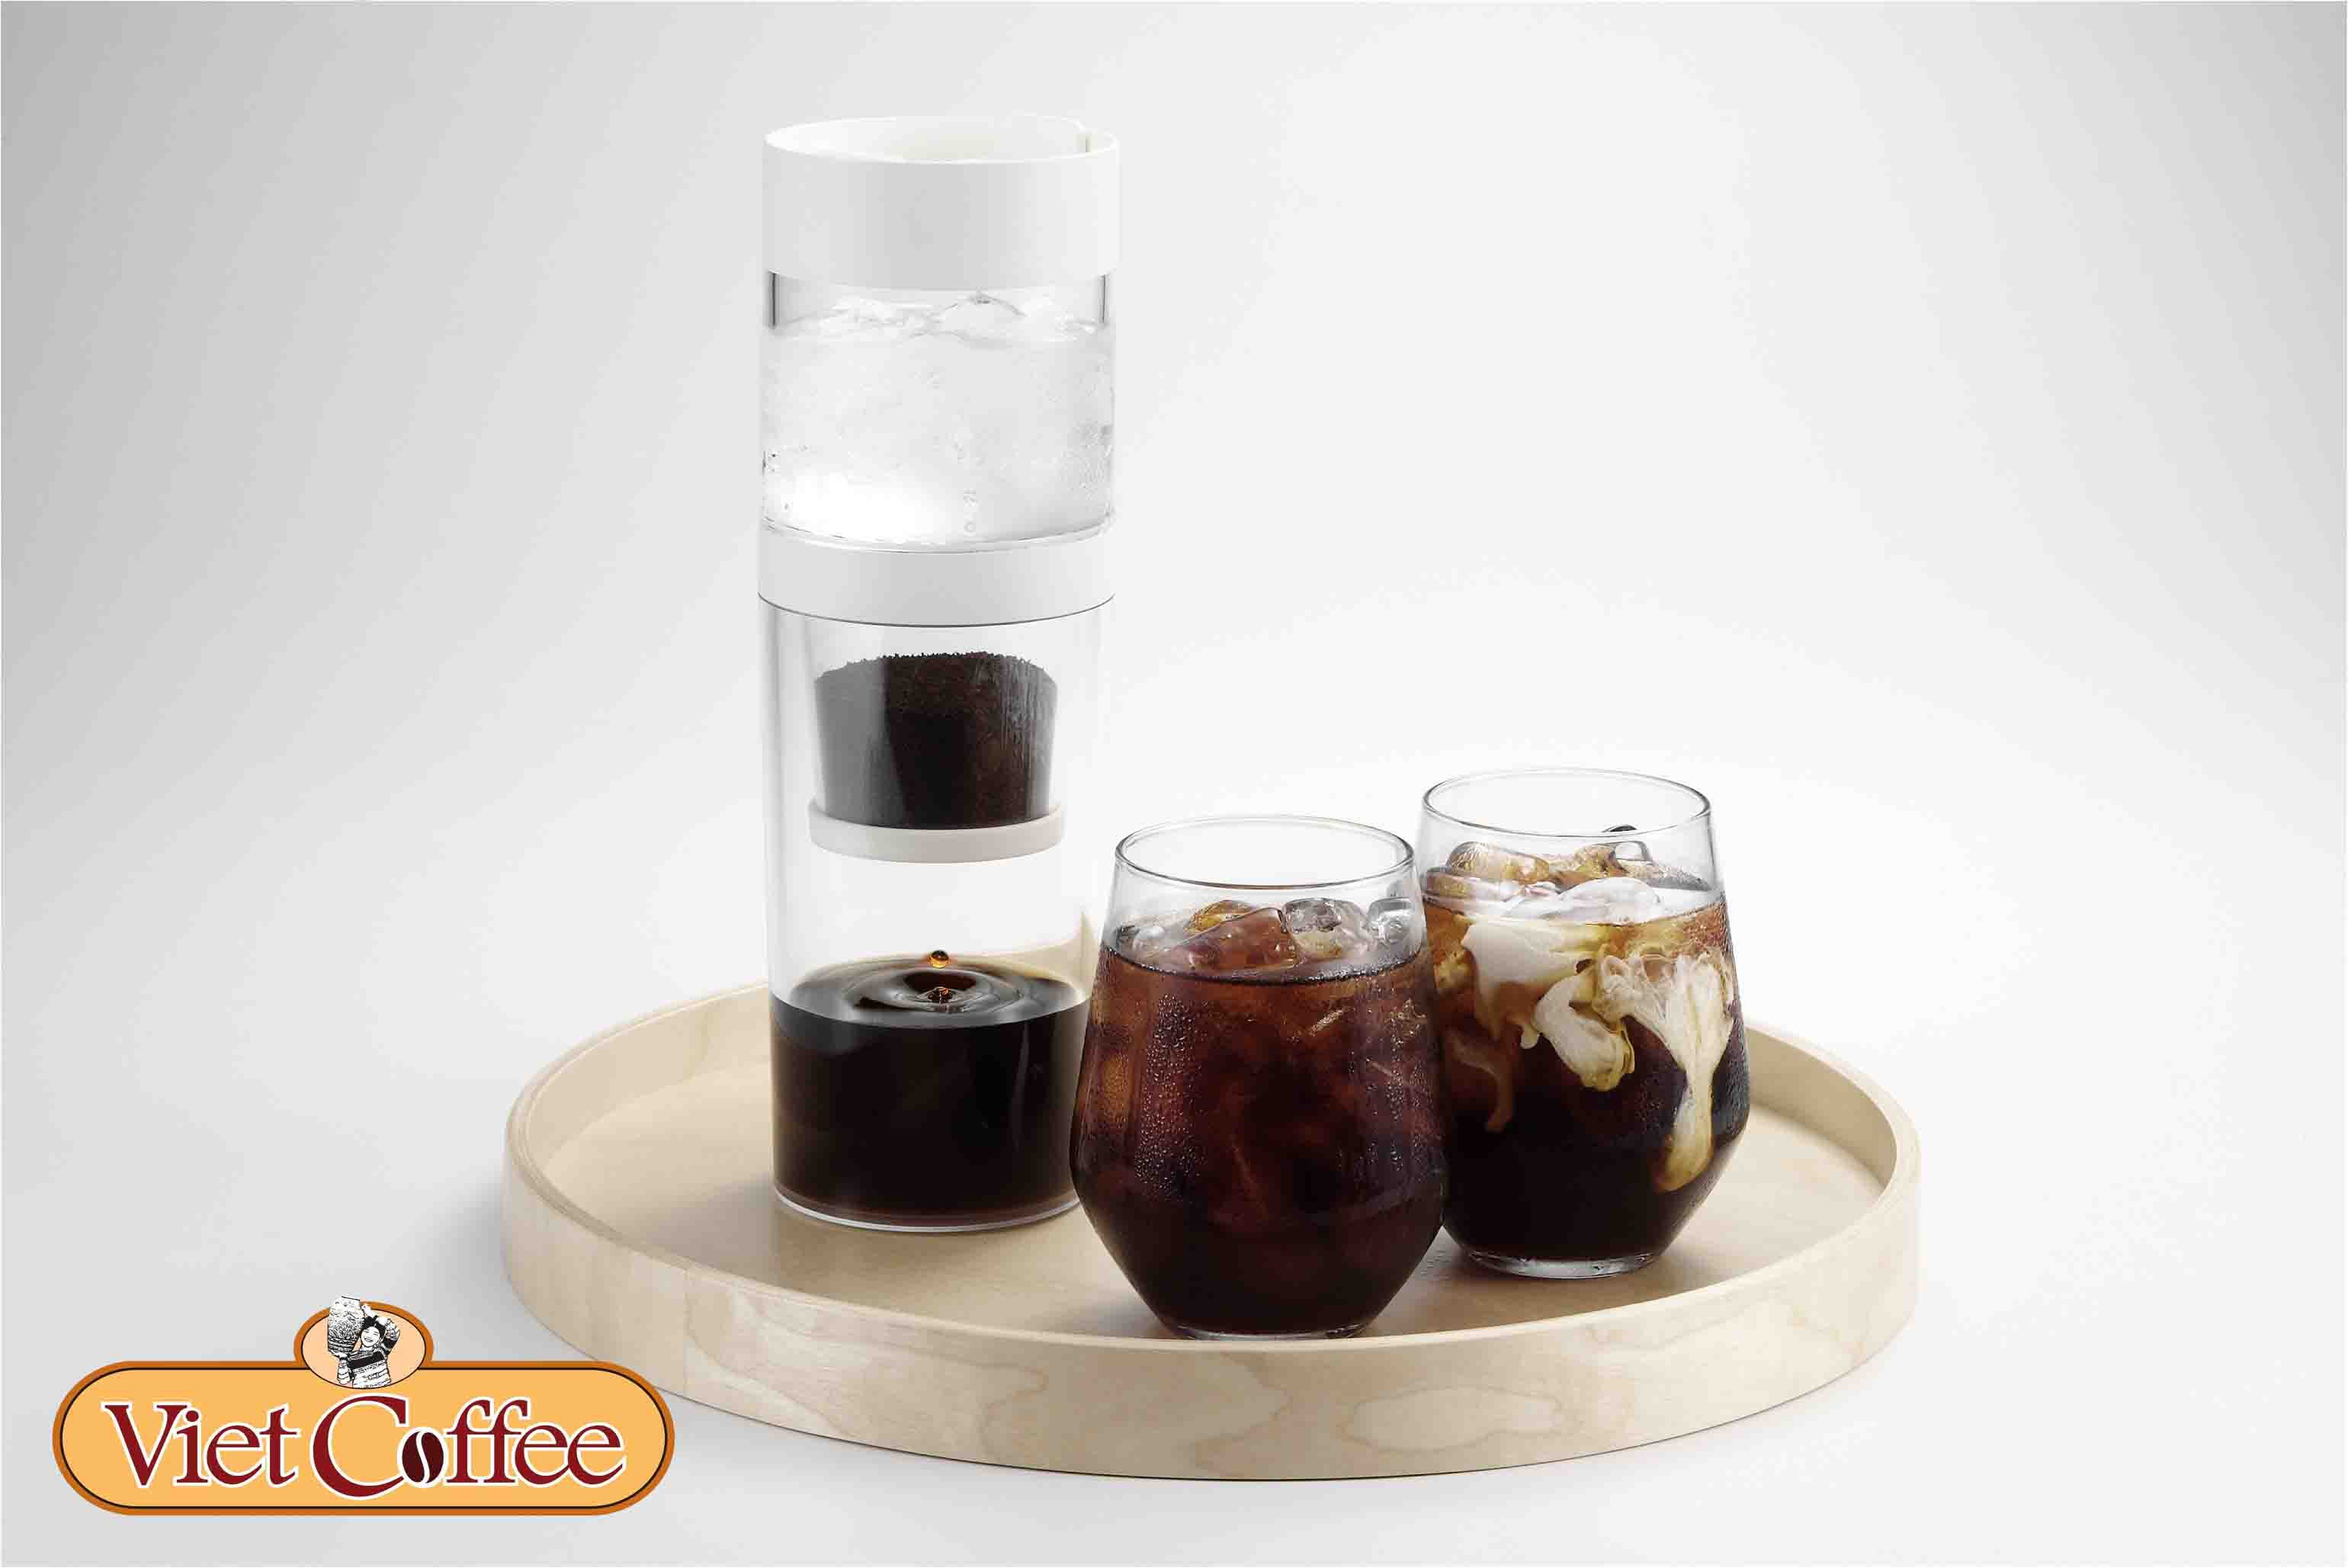 Coffee cups was made by Cold Brew method